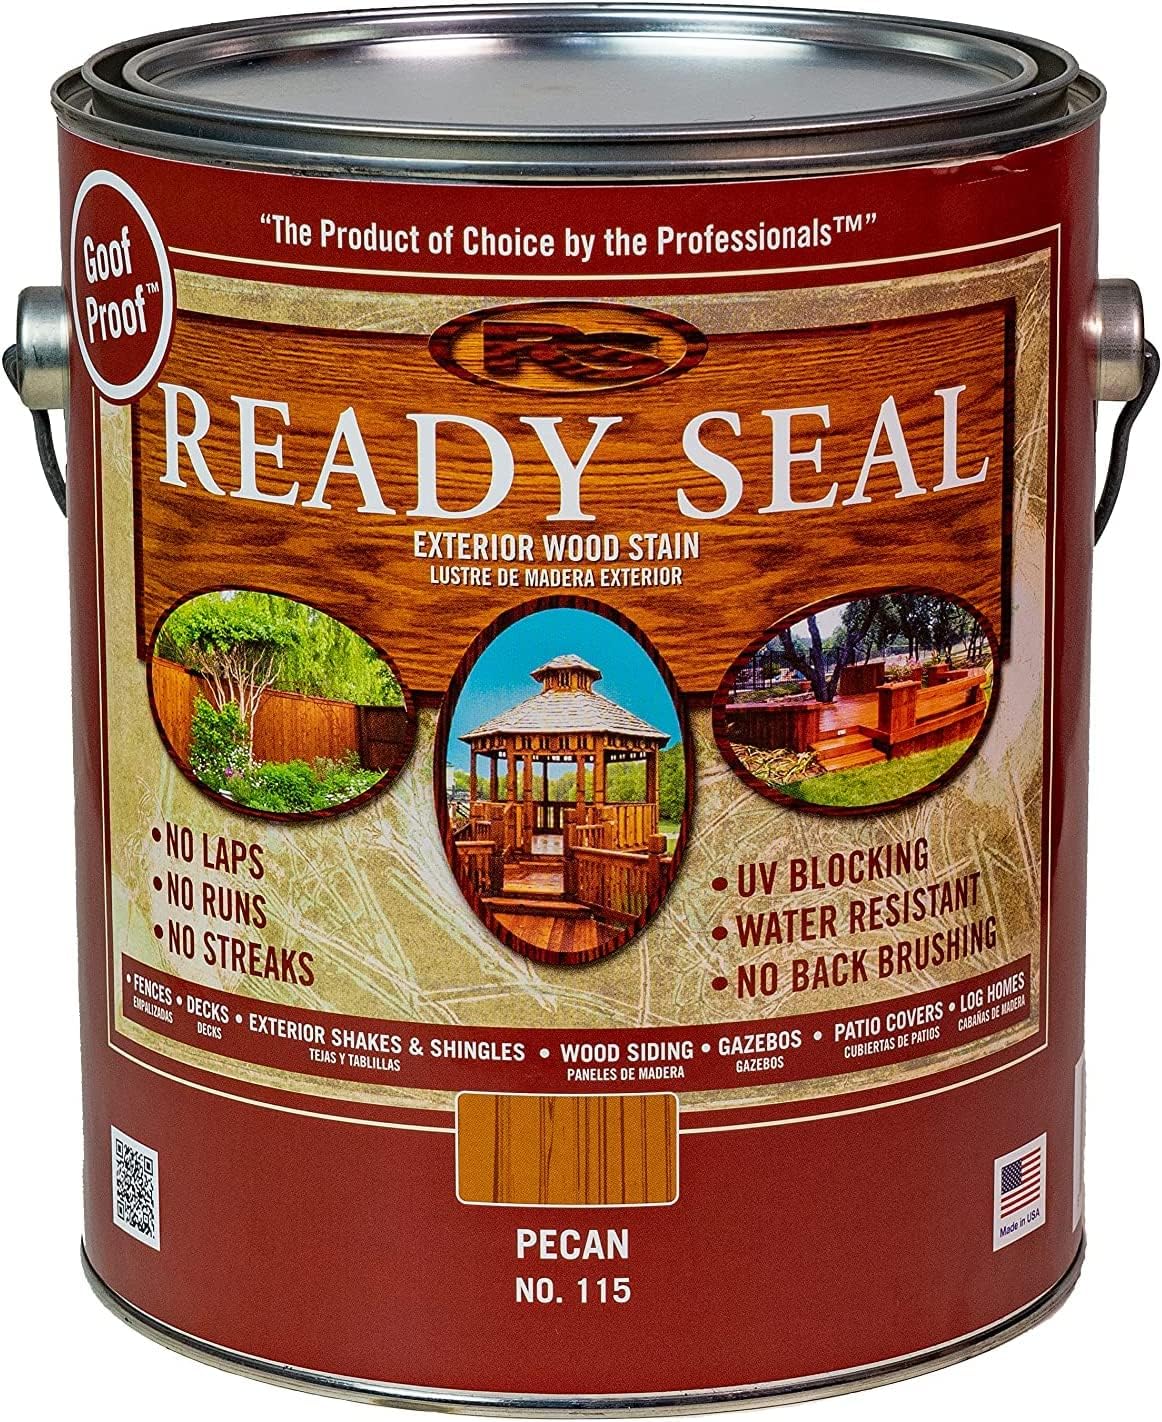 Ready Seal Exterior Stain and Sealer-1 Gallon can [...]